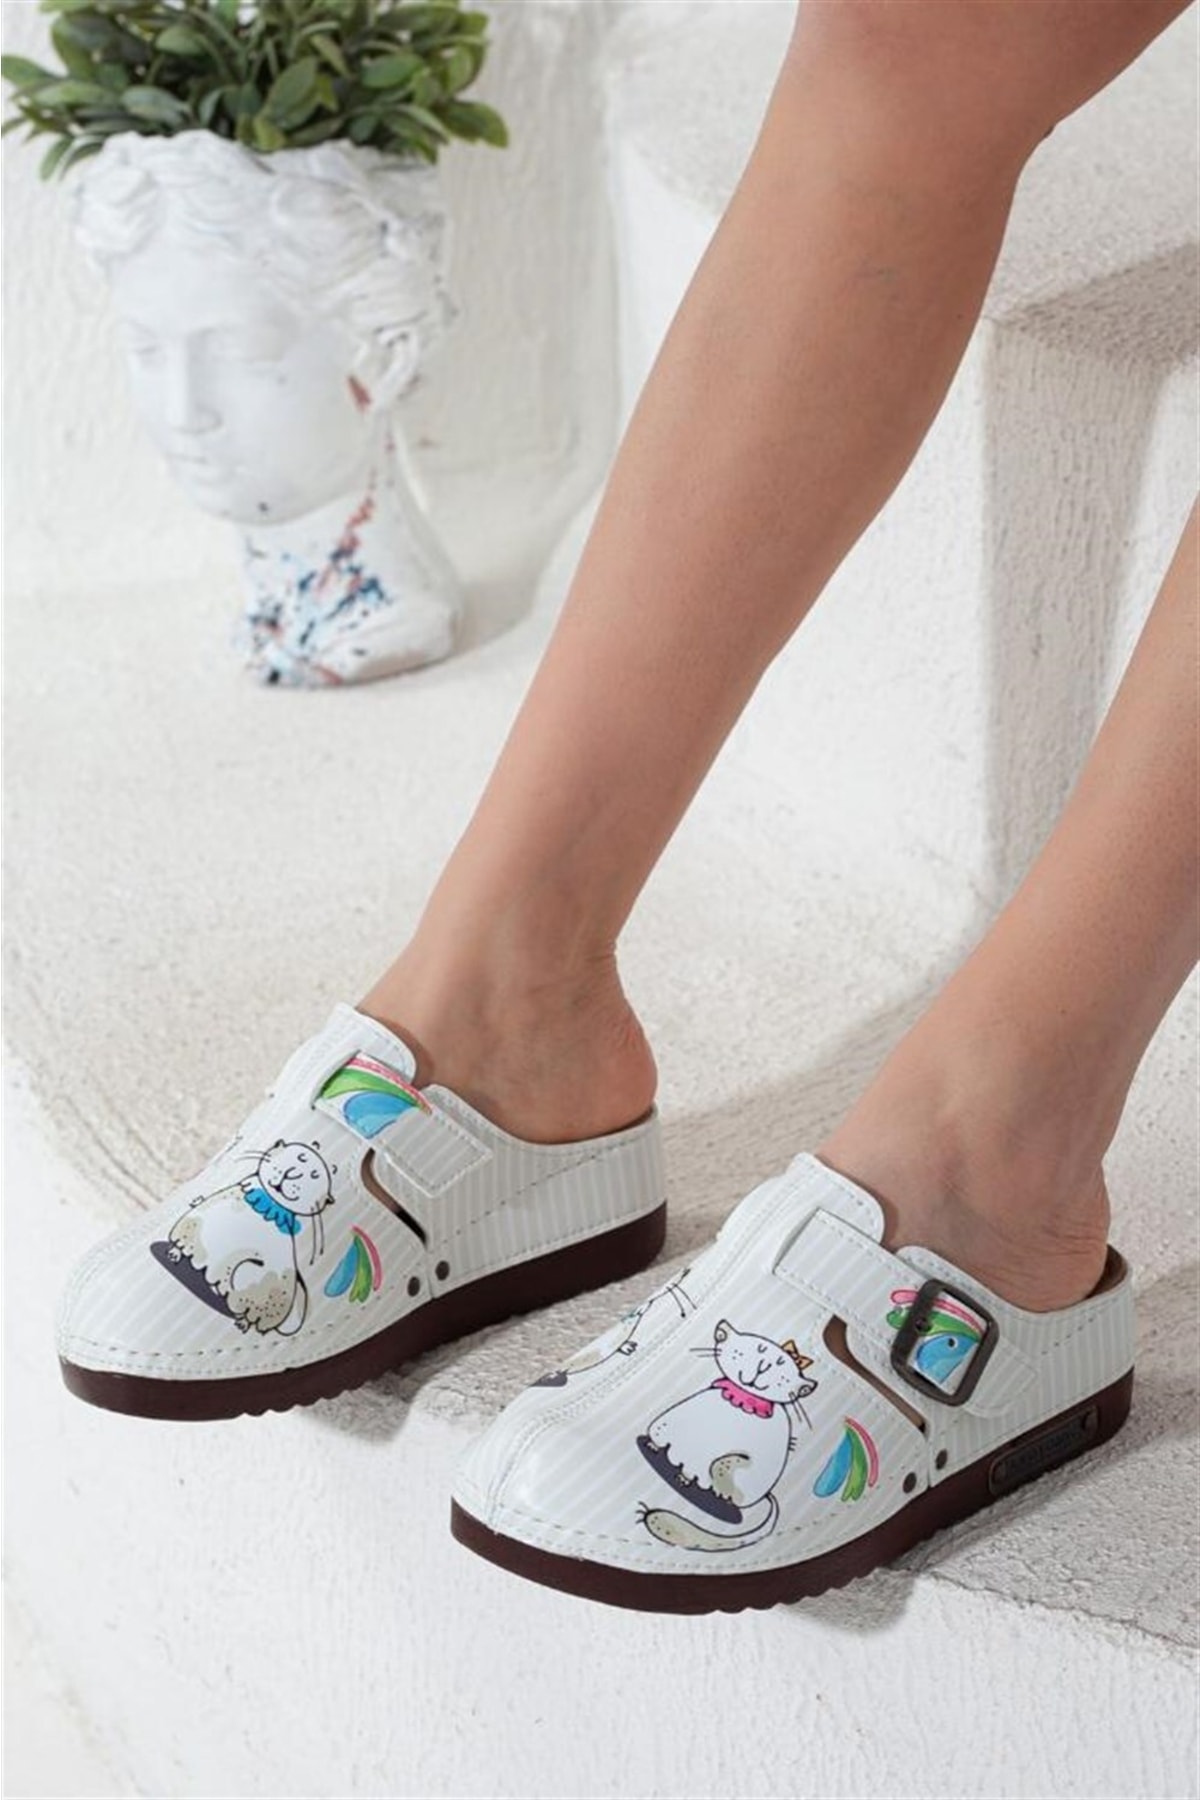 Orthopedic, Anatomical, Perforated, Soft Sole, Cat Doctor, Nurse, Daily Walking Slippers Woman